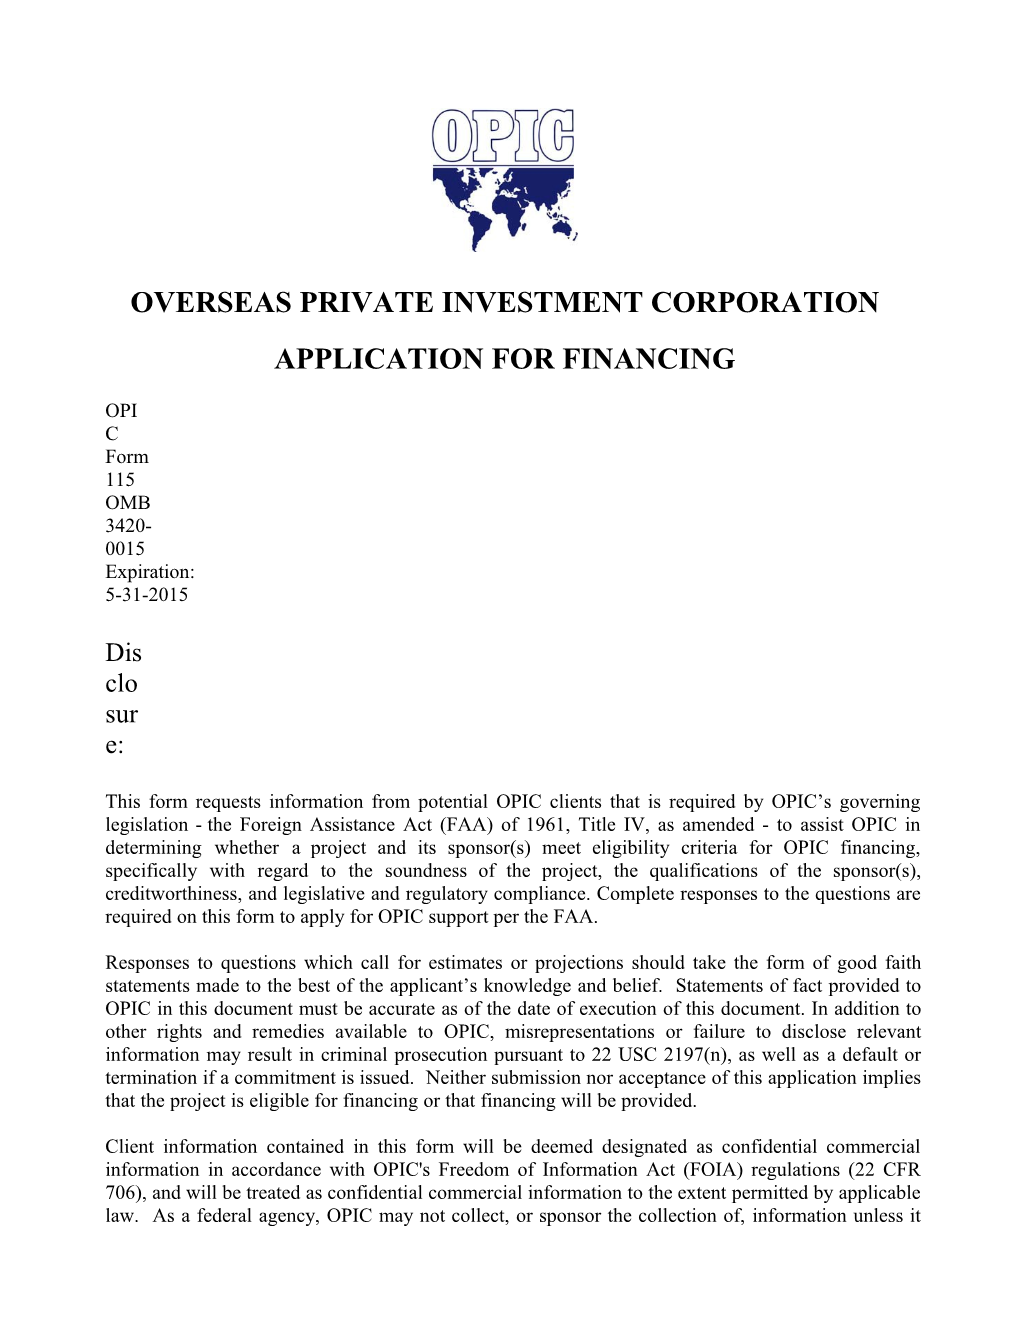 Overseas Private Investment Corporation Application for Financing